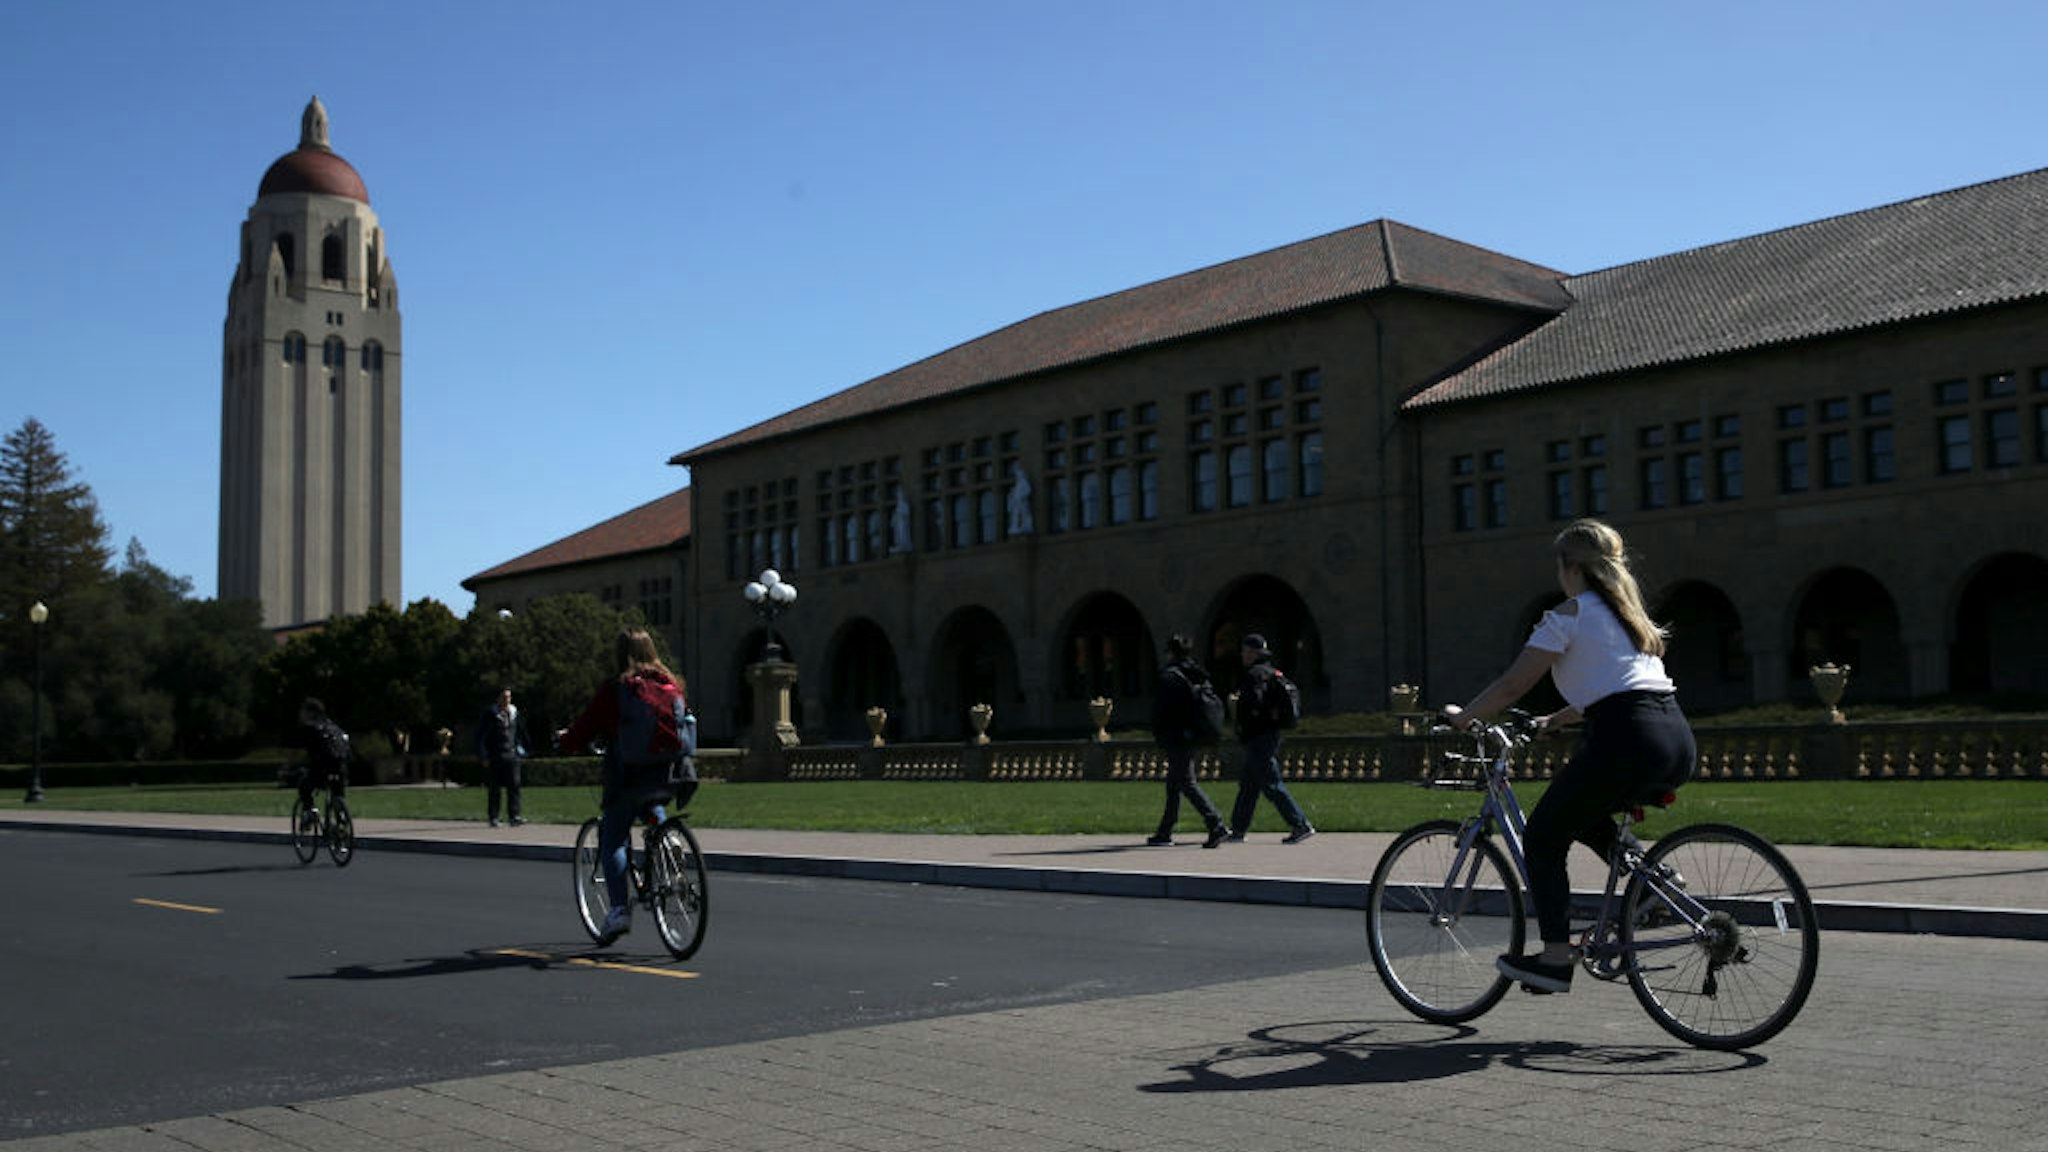 STANFORD, CA - MARCH 12: Cyclists ride by Hoover Tower on the Stanford University campus on March 12, 2019 in Stanford, California. More than 40 people, including actresses Lori Loughlin and Felicity Huffman, have been charged in a widespread elite college admission bribery scheme. Parents, ACT and SAT administrators and coaches at universities including Stanford, Georgetown, Yale, and the University of Southern California have been charged.